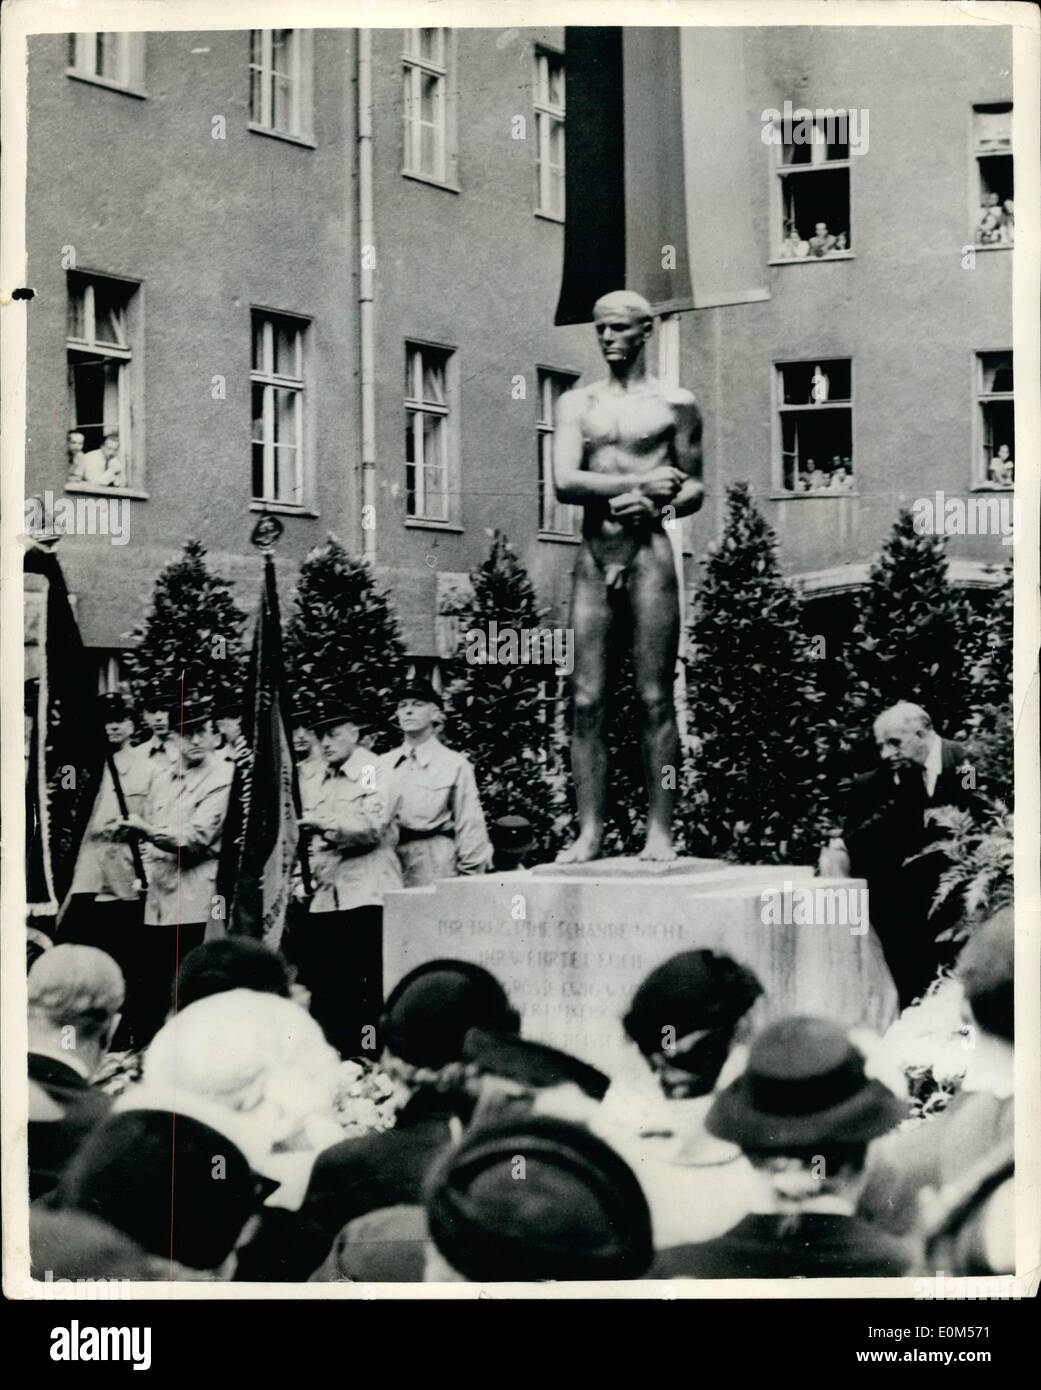 Jul. 07, 1953 - Anti-Hitler memorial unveiled in Berlin. Anniversary of Plot.: Widows and children of executed anti-Nazi resistance fighters attended the unveilling in Berlin recently of a memorial to the victims of the anti-Hitler plot of July 20th 1944. The memorial was unveiled by Herr Reuter the Lord Mayor of Berlin who described the plot as a ''beginning like June 17th 1953'' the date of the beginning of the recent riots in East Germany Stock Photo